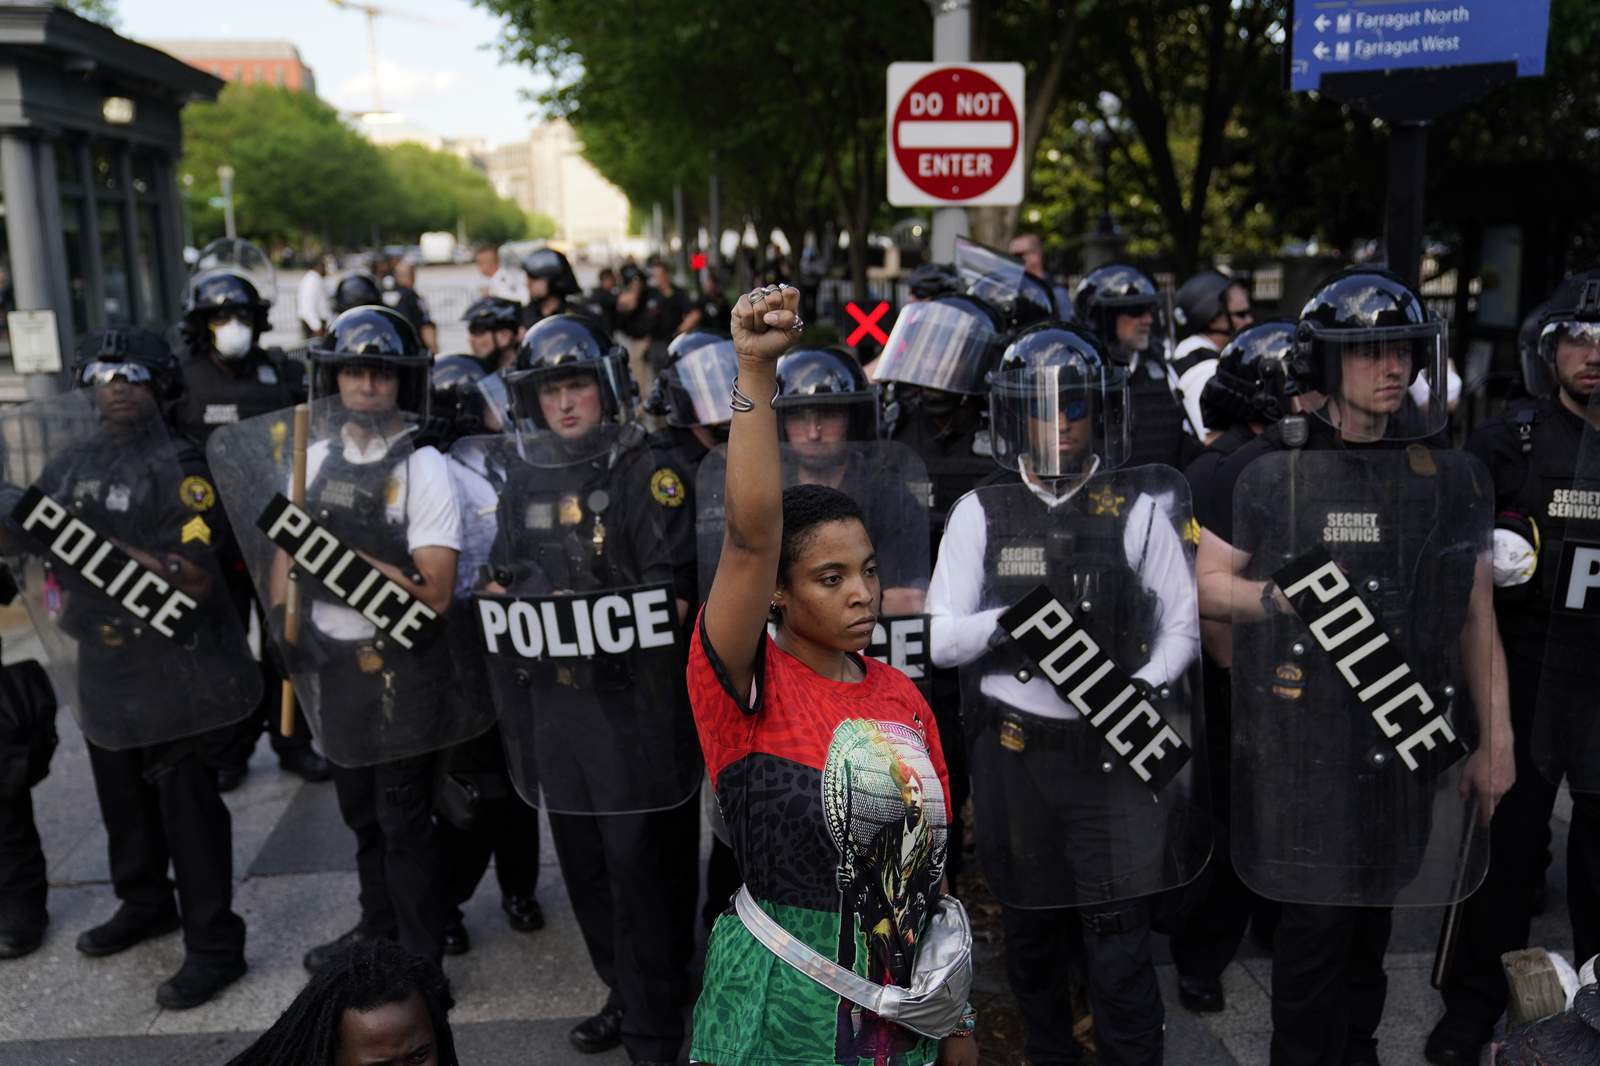 LIVE COVERAGE: Police brutality protests held across US